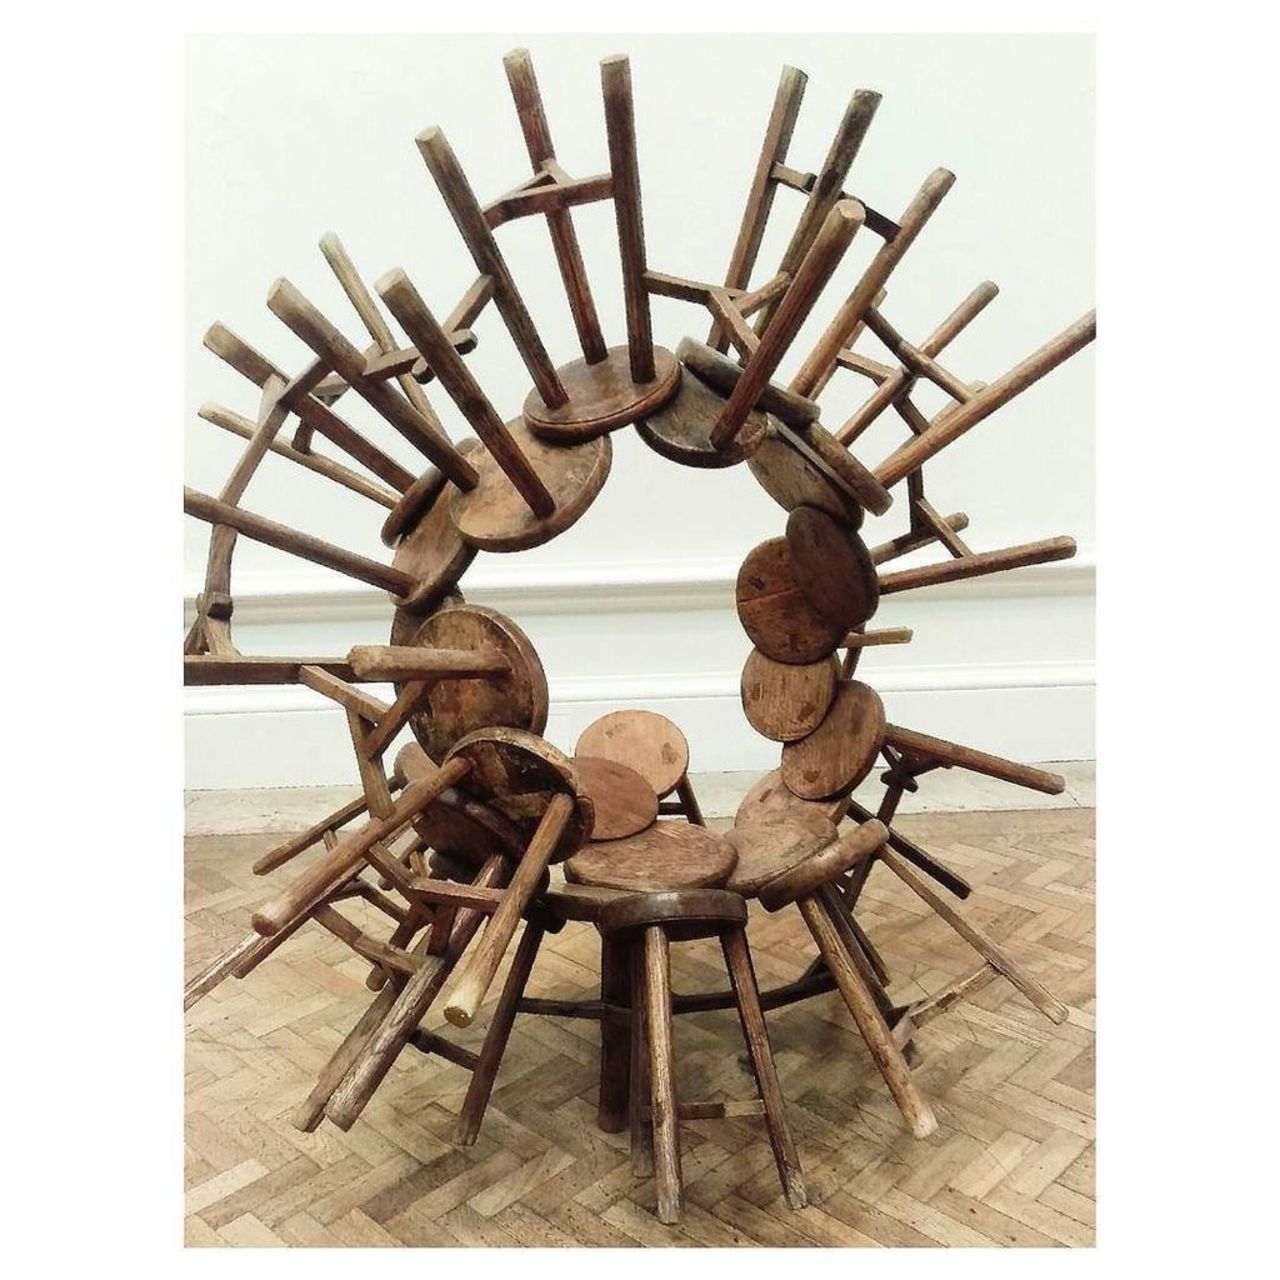 'Chairs' by #AiWeiWei 
#art #artist #exhibition #installation #chairs #royalacademy #london http://ift.tt/1NK9MMy https://t.co/YN7lPndfMg